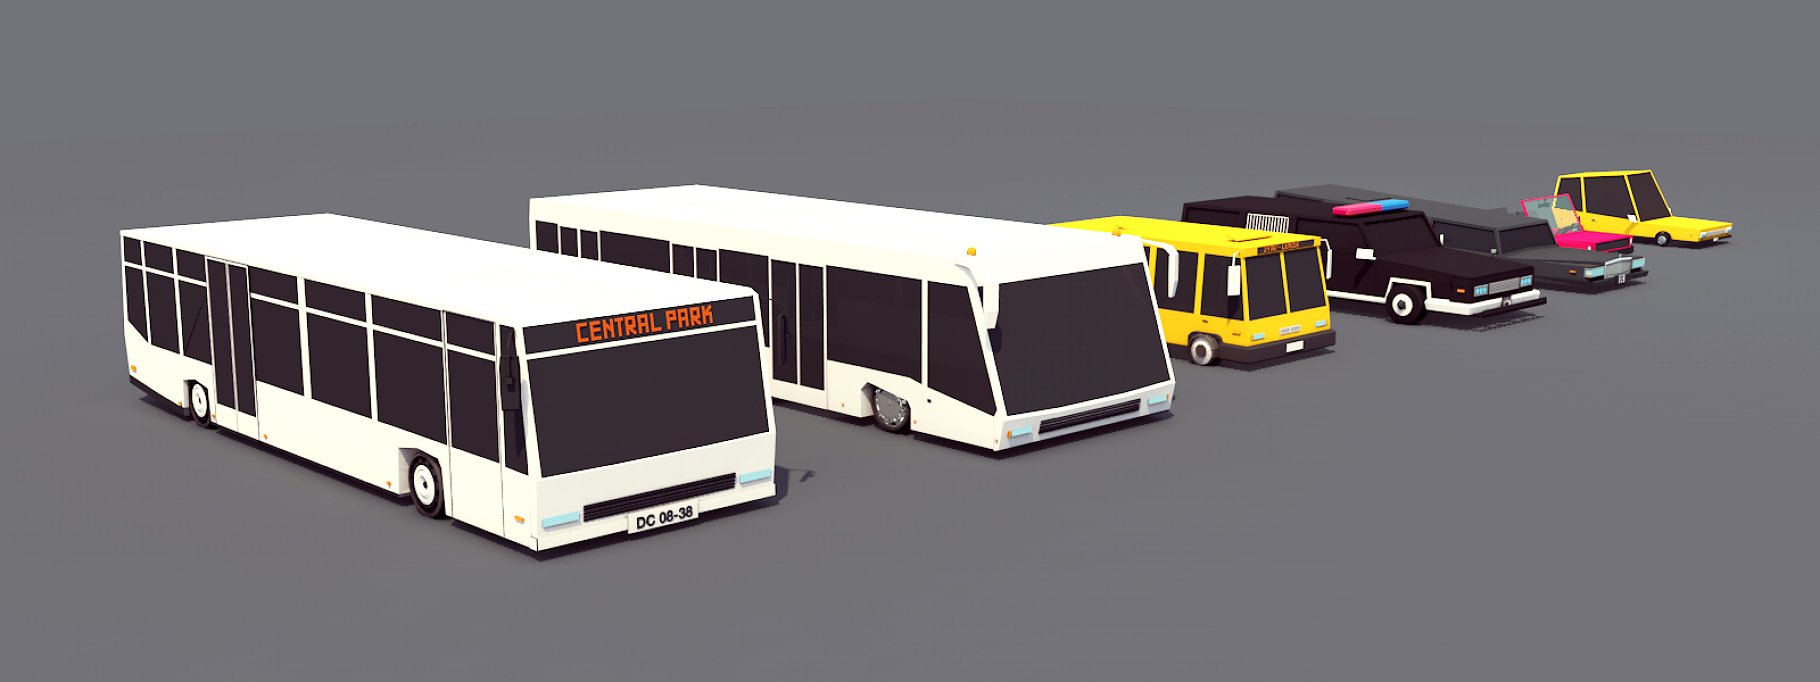 Mockup of low poly city cars on a gray background.